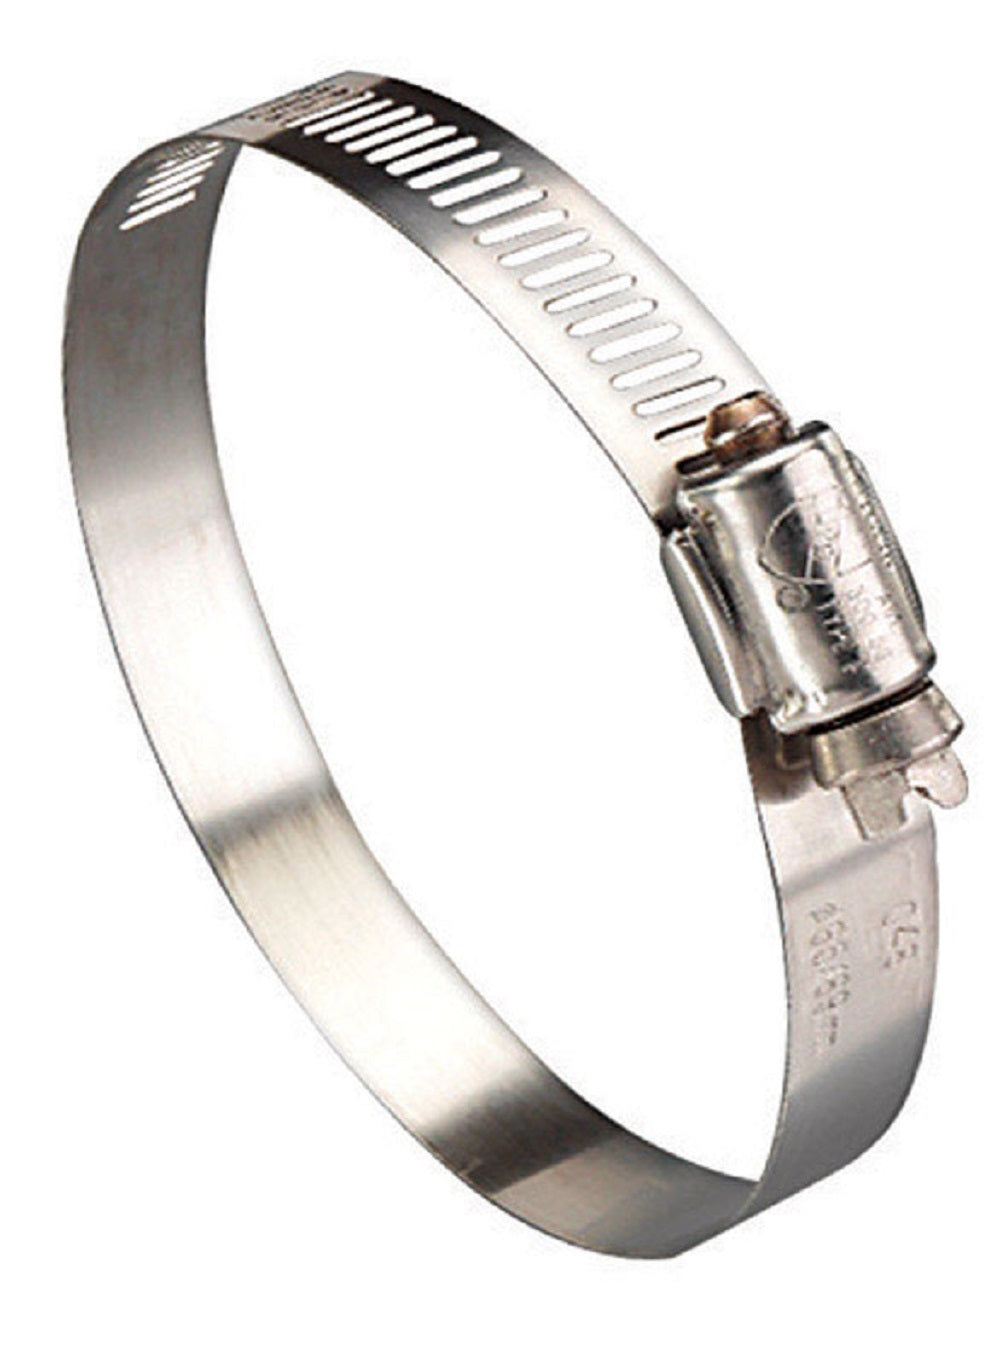 Ideal 620P96551 Tridon Marine Hose Clamp, Stainless Steel